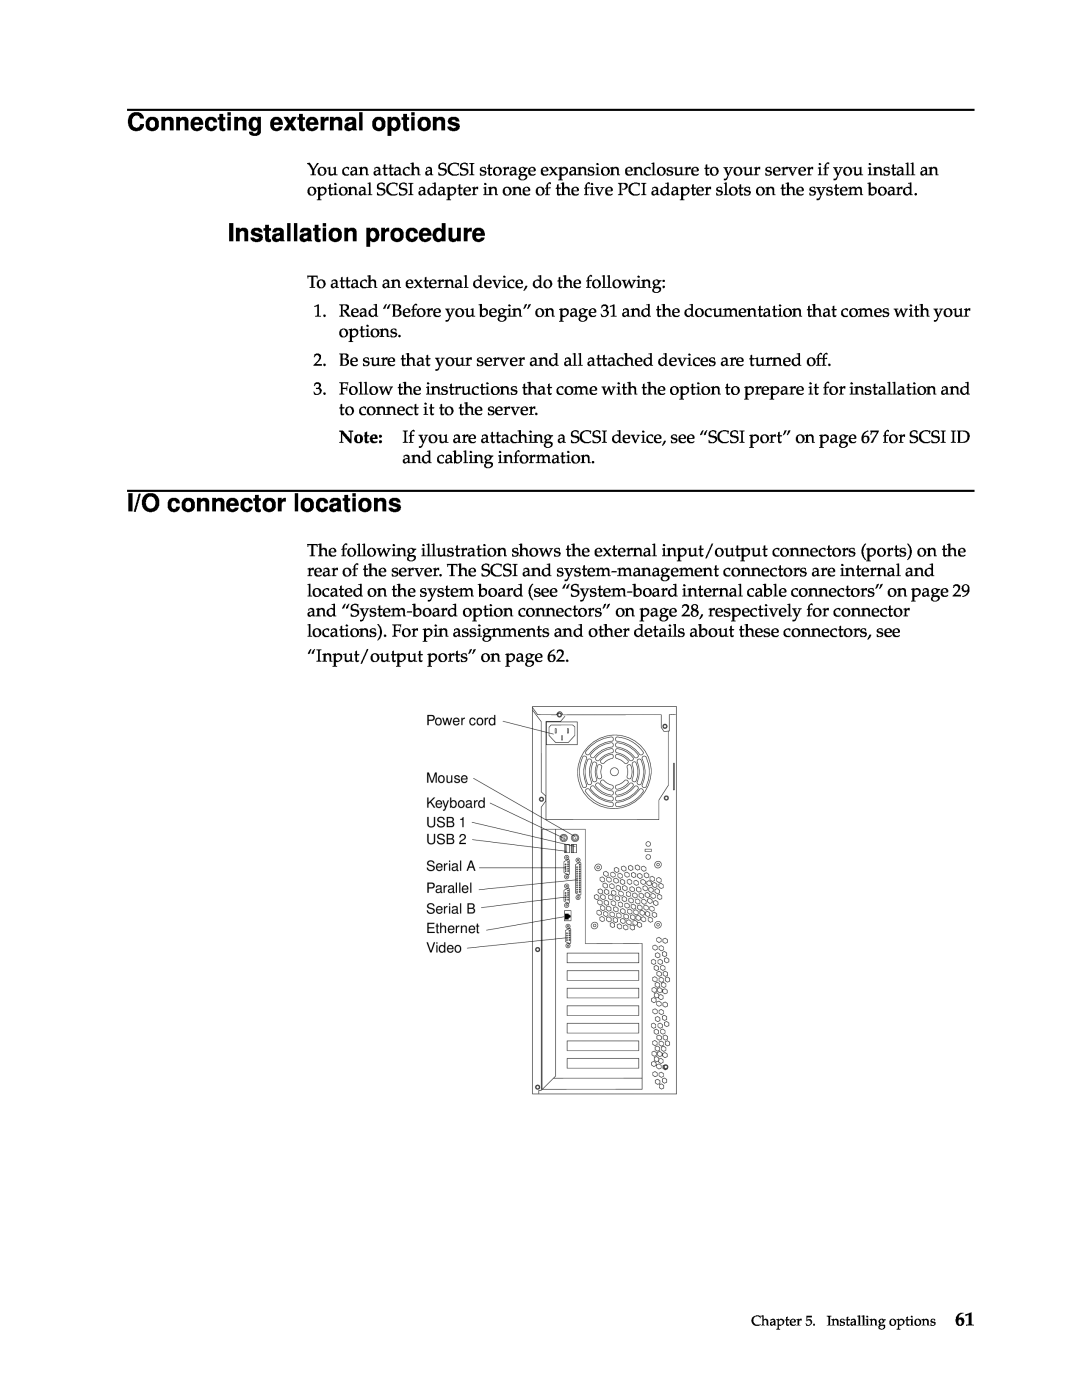 IBM 220 manual Connecting external options, Installation procedure, I/O connector locations 